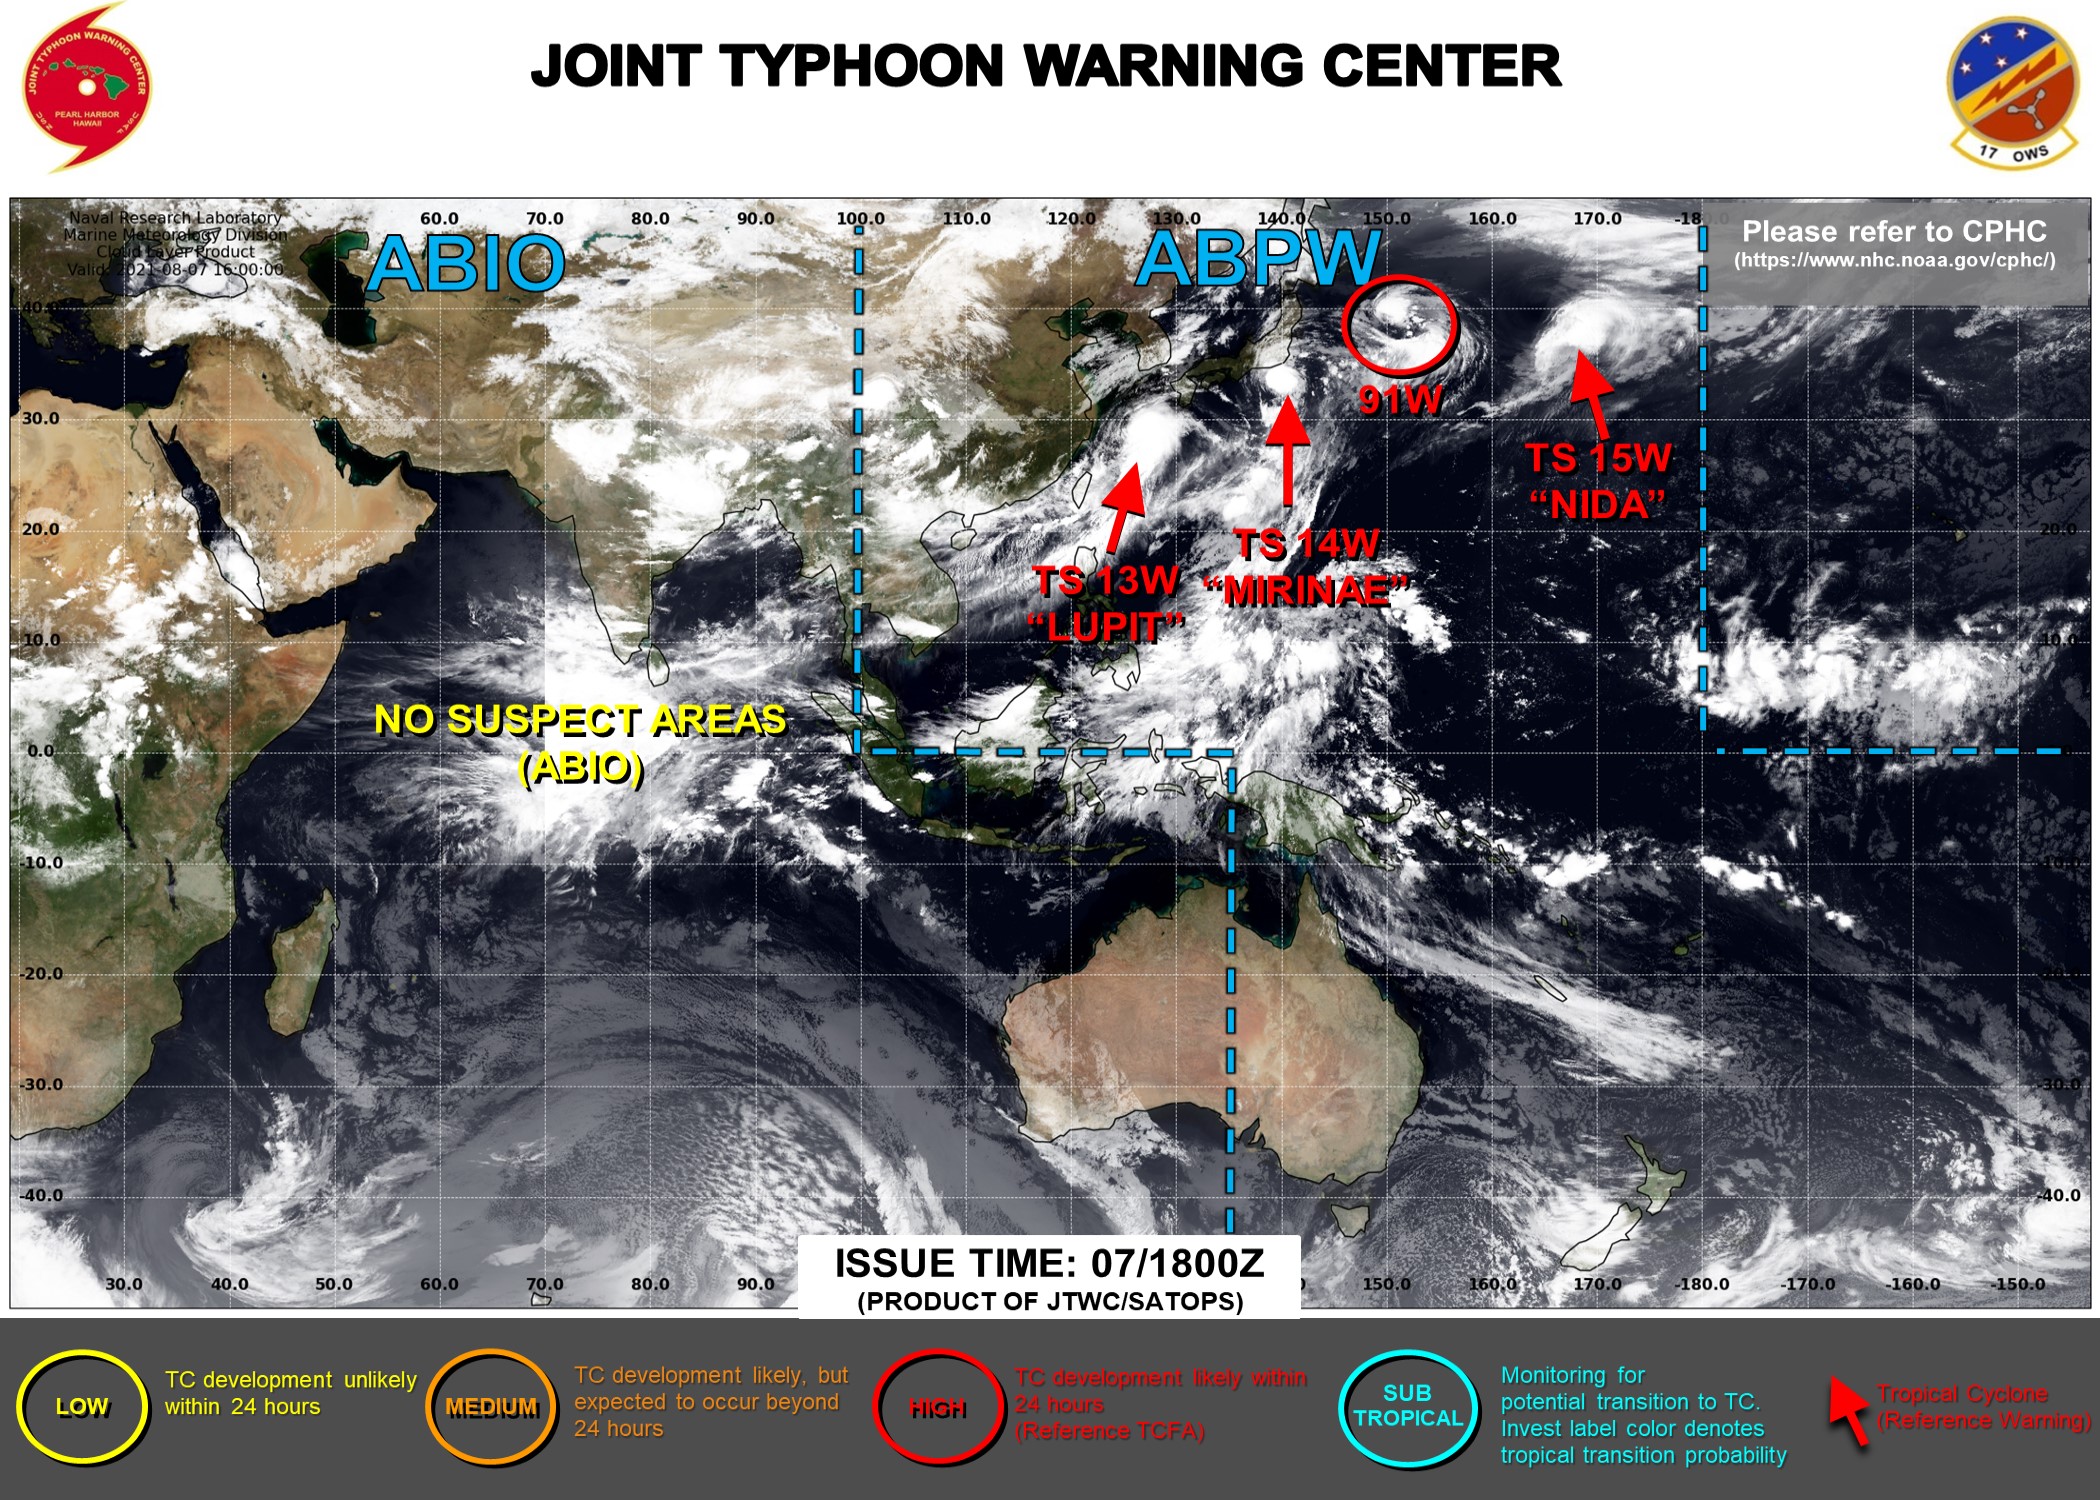 JTWC ARE ISSUING 6HOURLY WARNINGS ON 13W AND 14W. WARNING 12/FINAL WAS ISSUED ON 15W AT 07/09UTC. INVEST 91W WAS UP-GRADED TO HIGH AT 07/17UTC. 3HOURLY SATELLITE BULLETINS ARE ISSUED ON 13W,14W AND 15W.